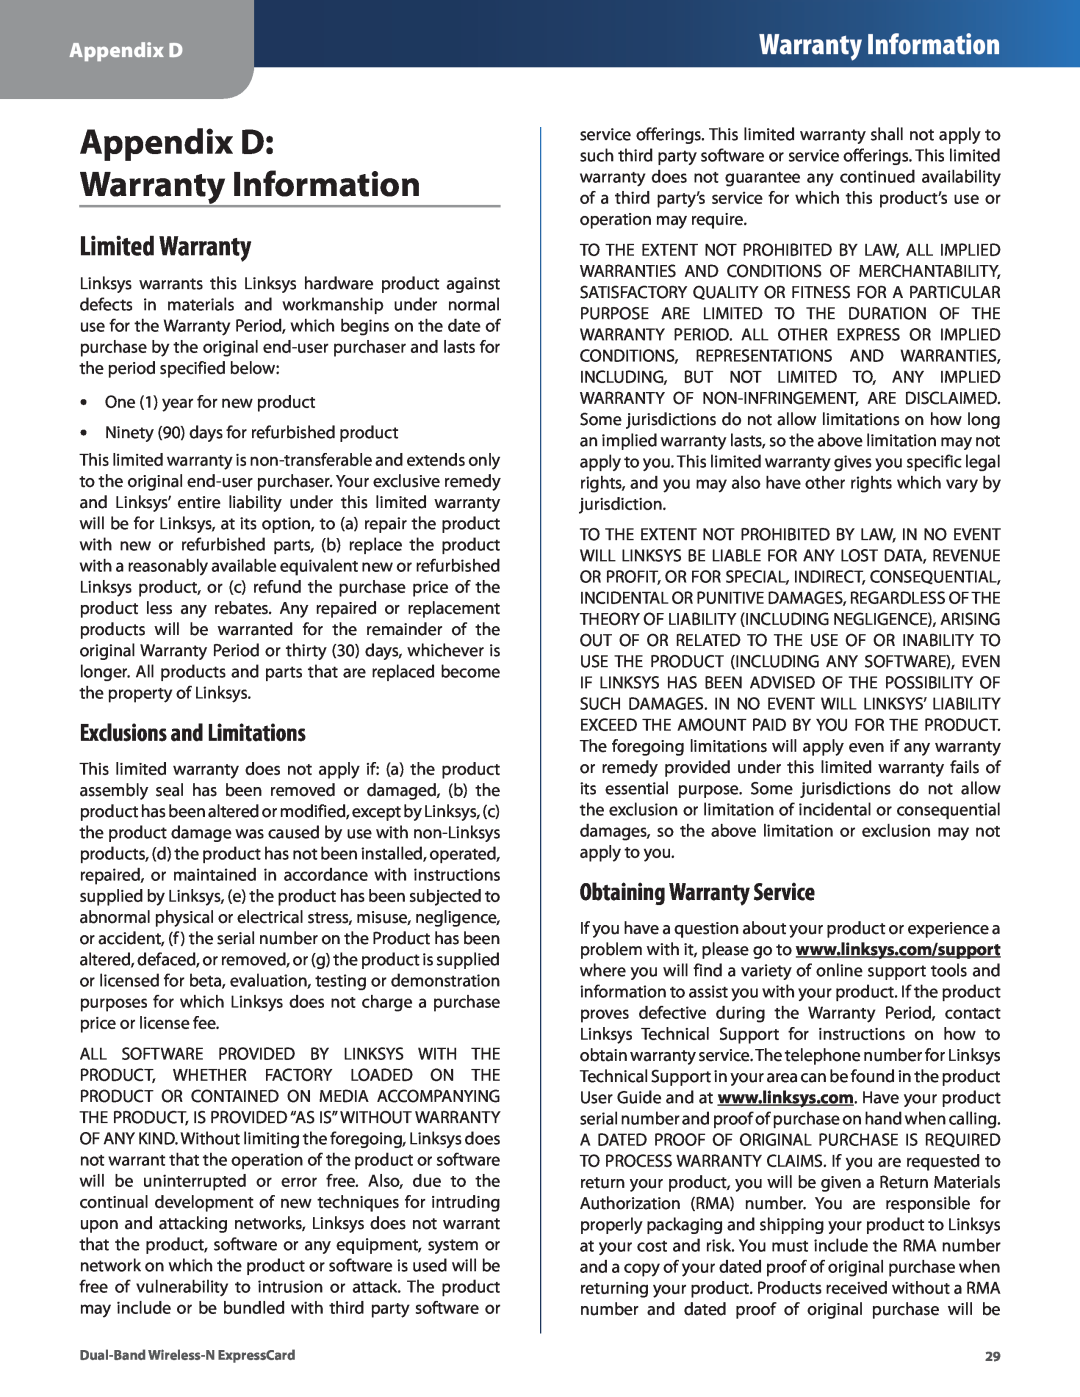 Cisco Systems WEC600N manual Appendix D Warranty Information, Limited Warranty, Exclusions and Limitations 